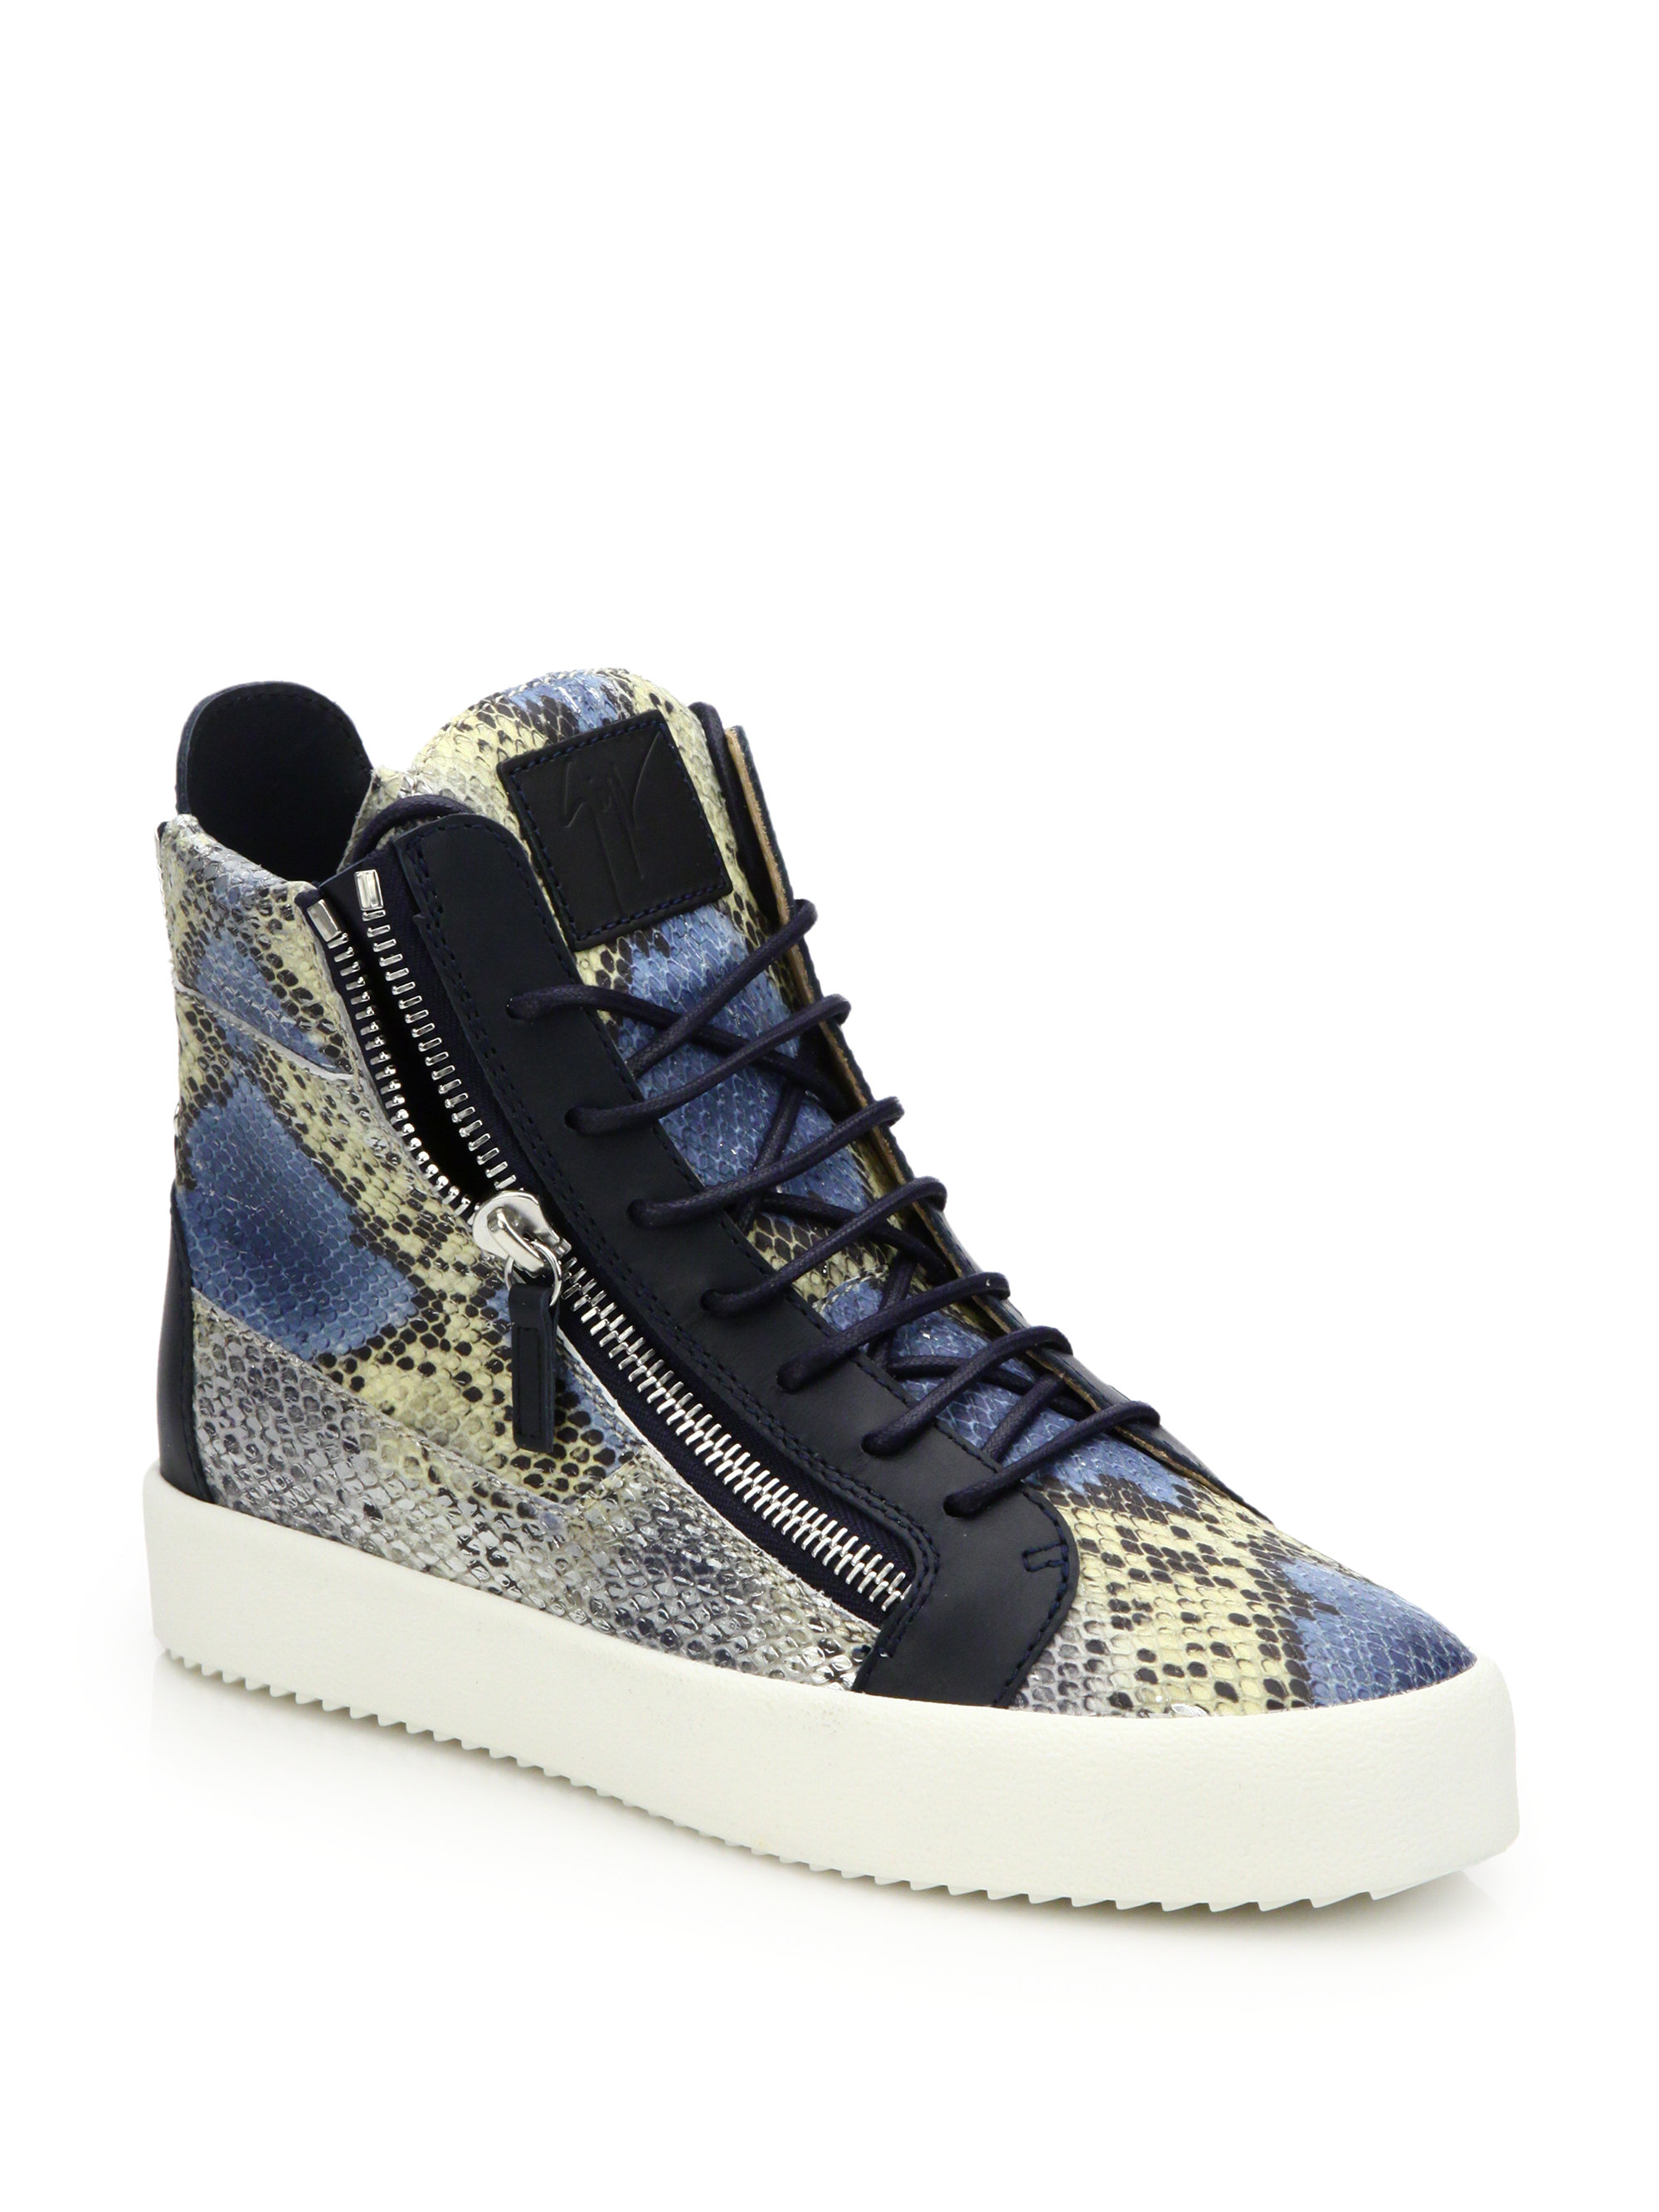 Giuseppe Zanotti Snakeskin-embossed Leather Double High-top Sneakers for